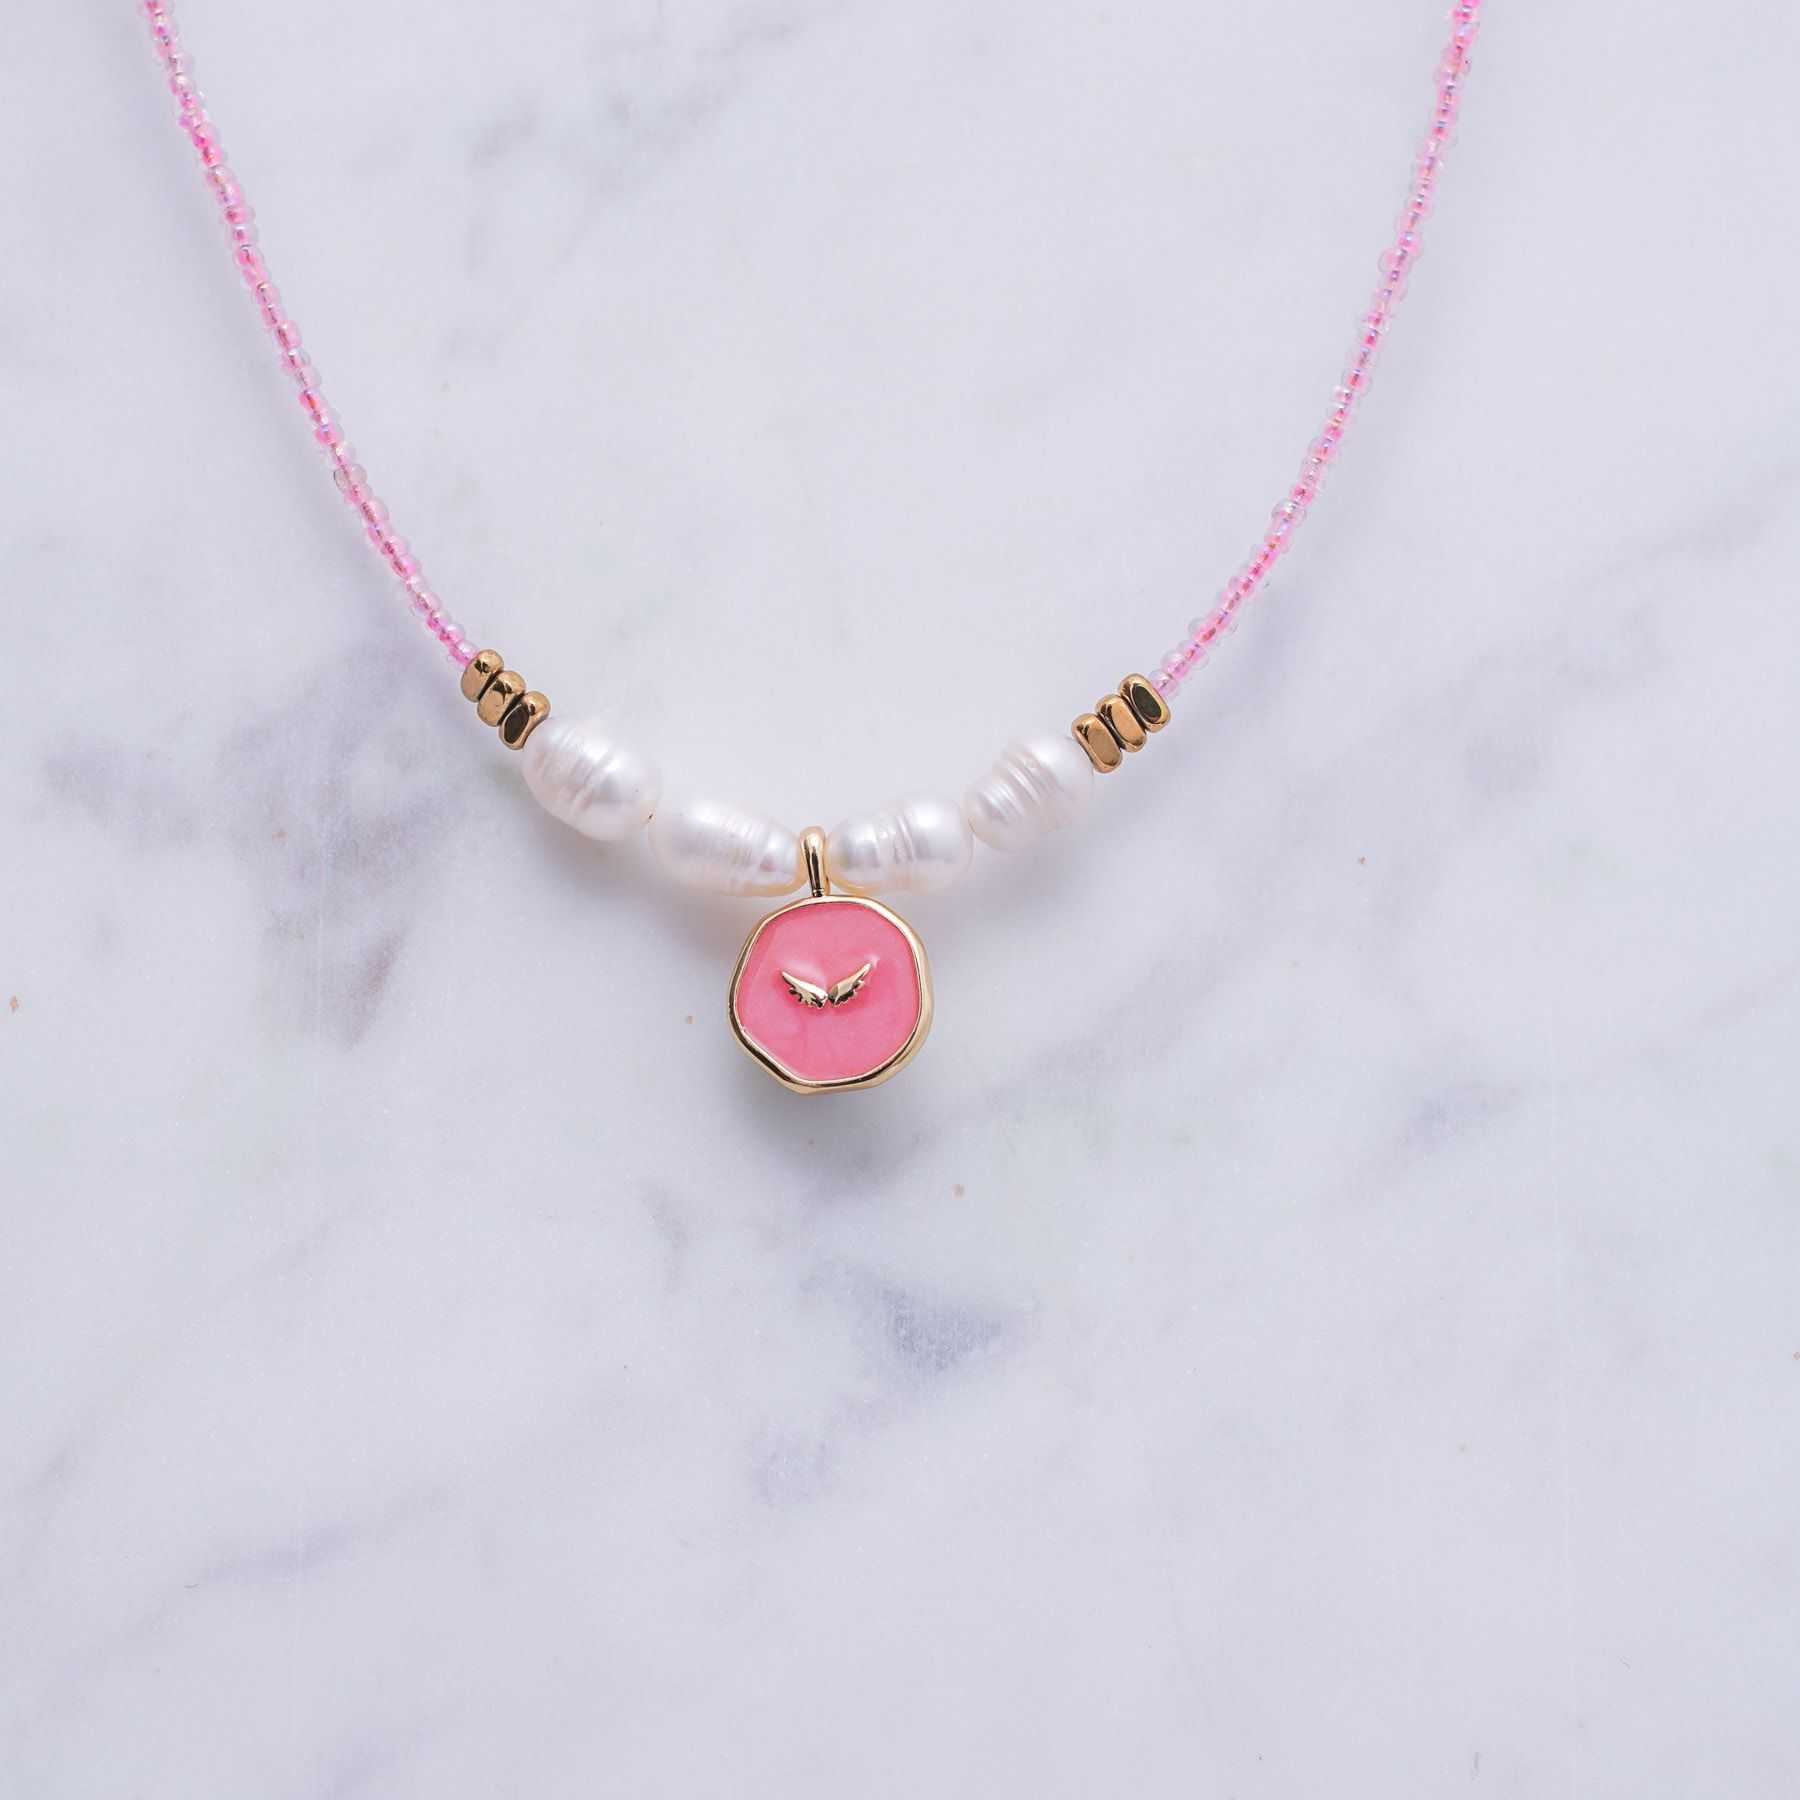 UP TO THE SKY NECKLACE - PINK